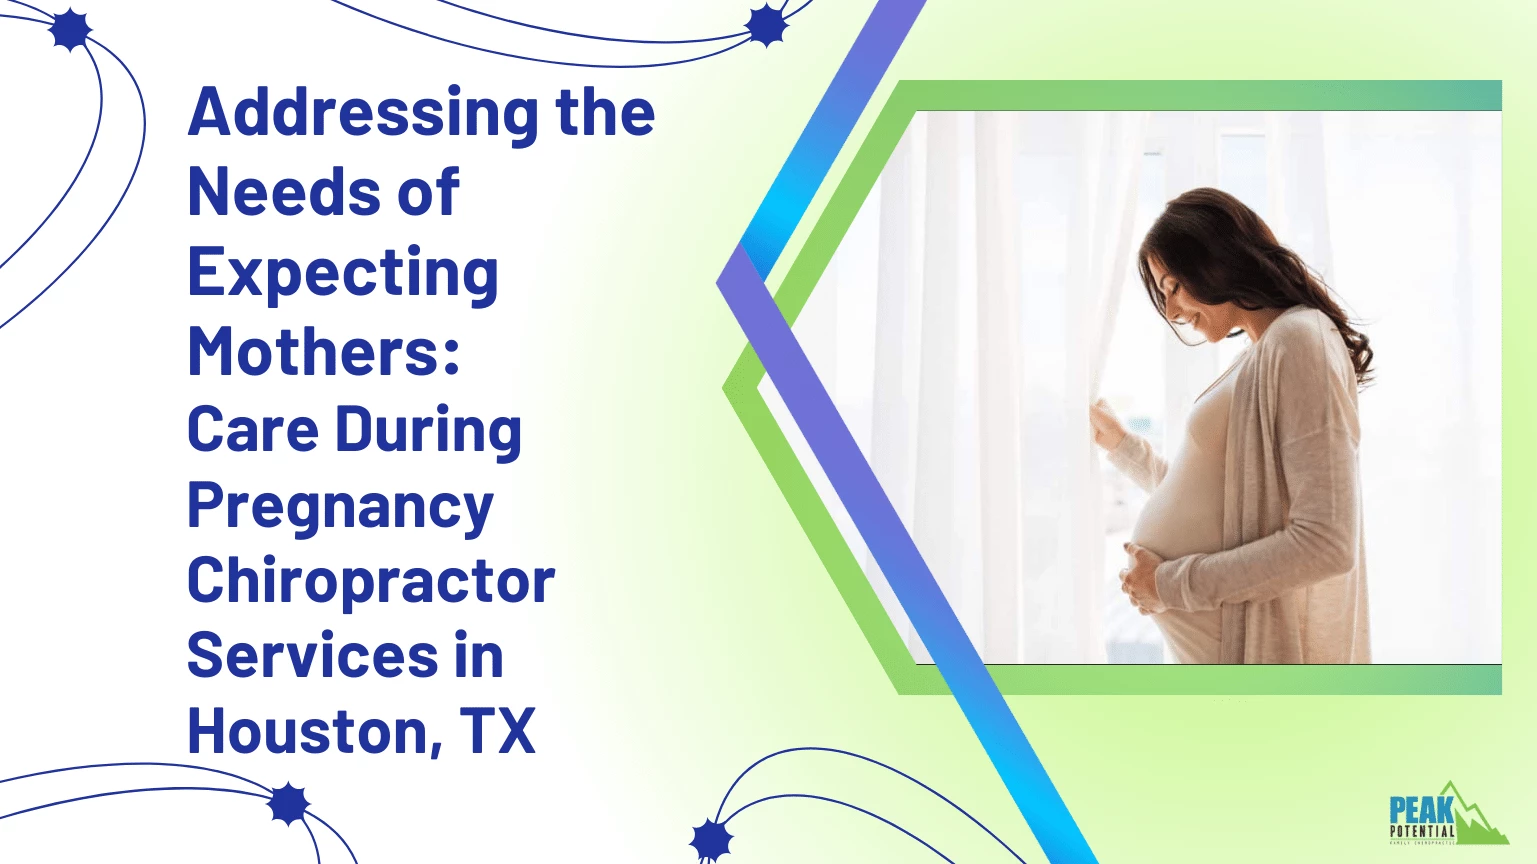 Addressing the Needs of Expecting Mothers Care During Pregnancy Chiropractor Services in Houston, TX